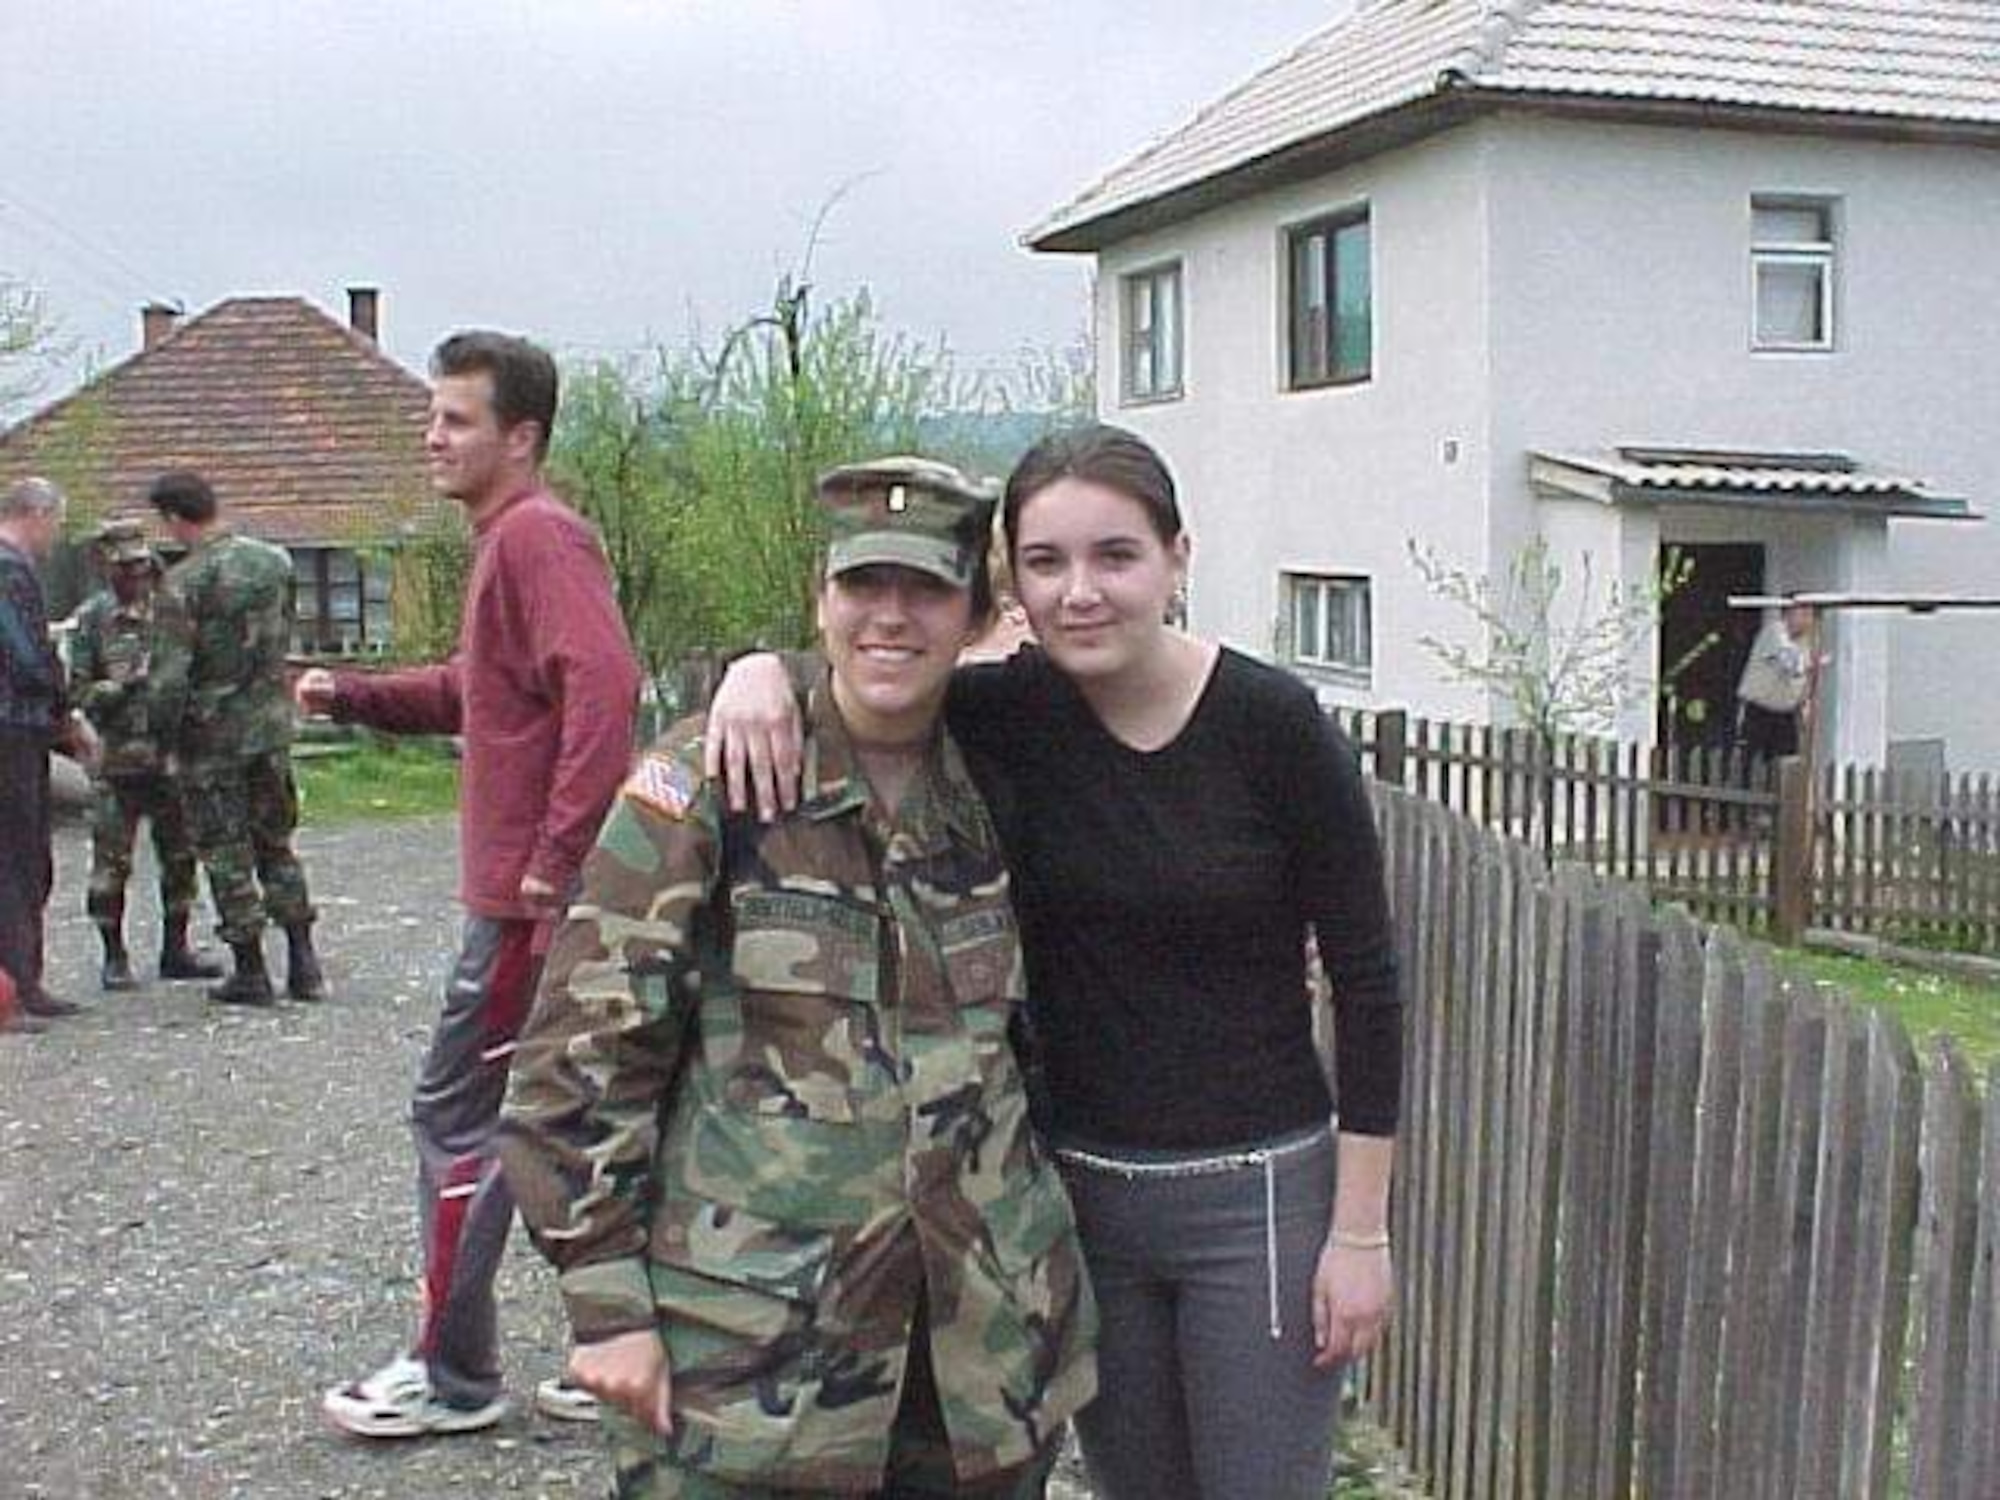 Now-Air Force Lt. Col. Elizabeth Hoettels, 423rd Medical Squadron commander, poses for a photo during a deployment in Bosnia with one of the locals, Samra, during her prior career as an Army Civil Affairs officer. Hoettels served 10 years in the Army before transitioning to the Air Force. (Courtesy photo)